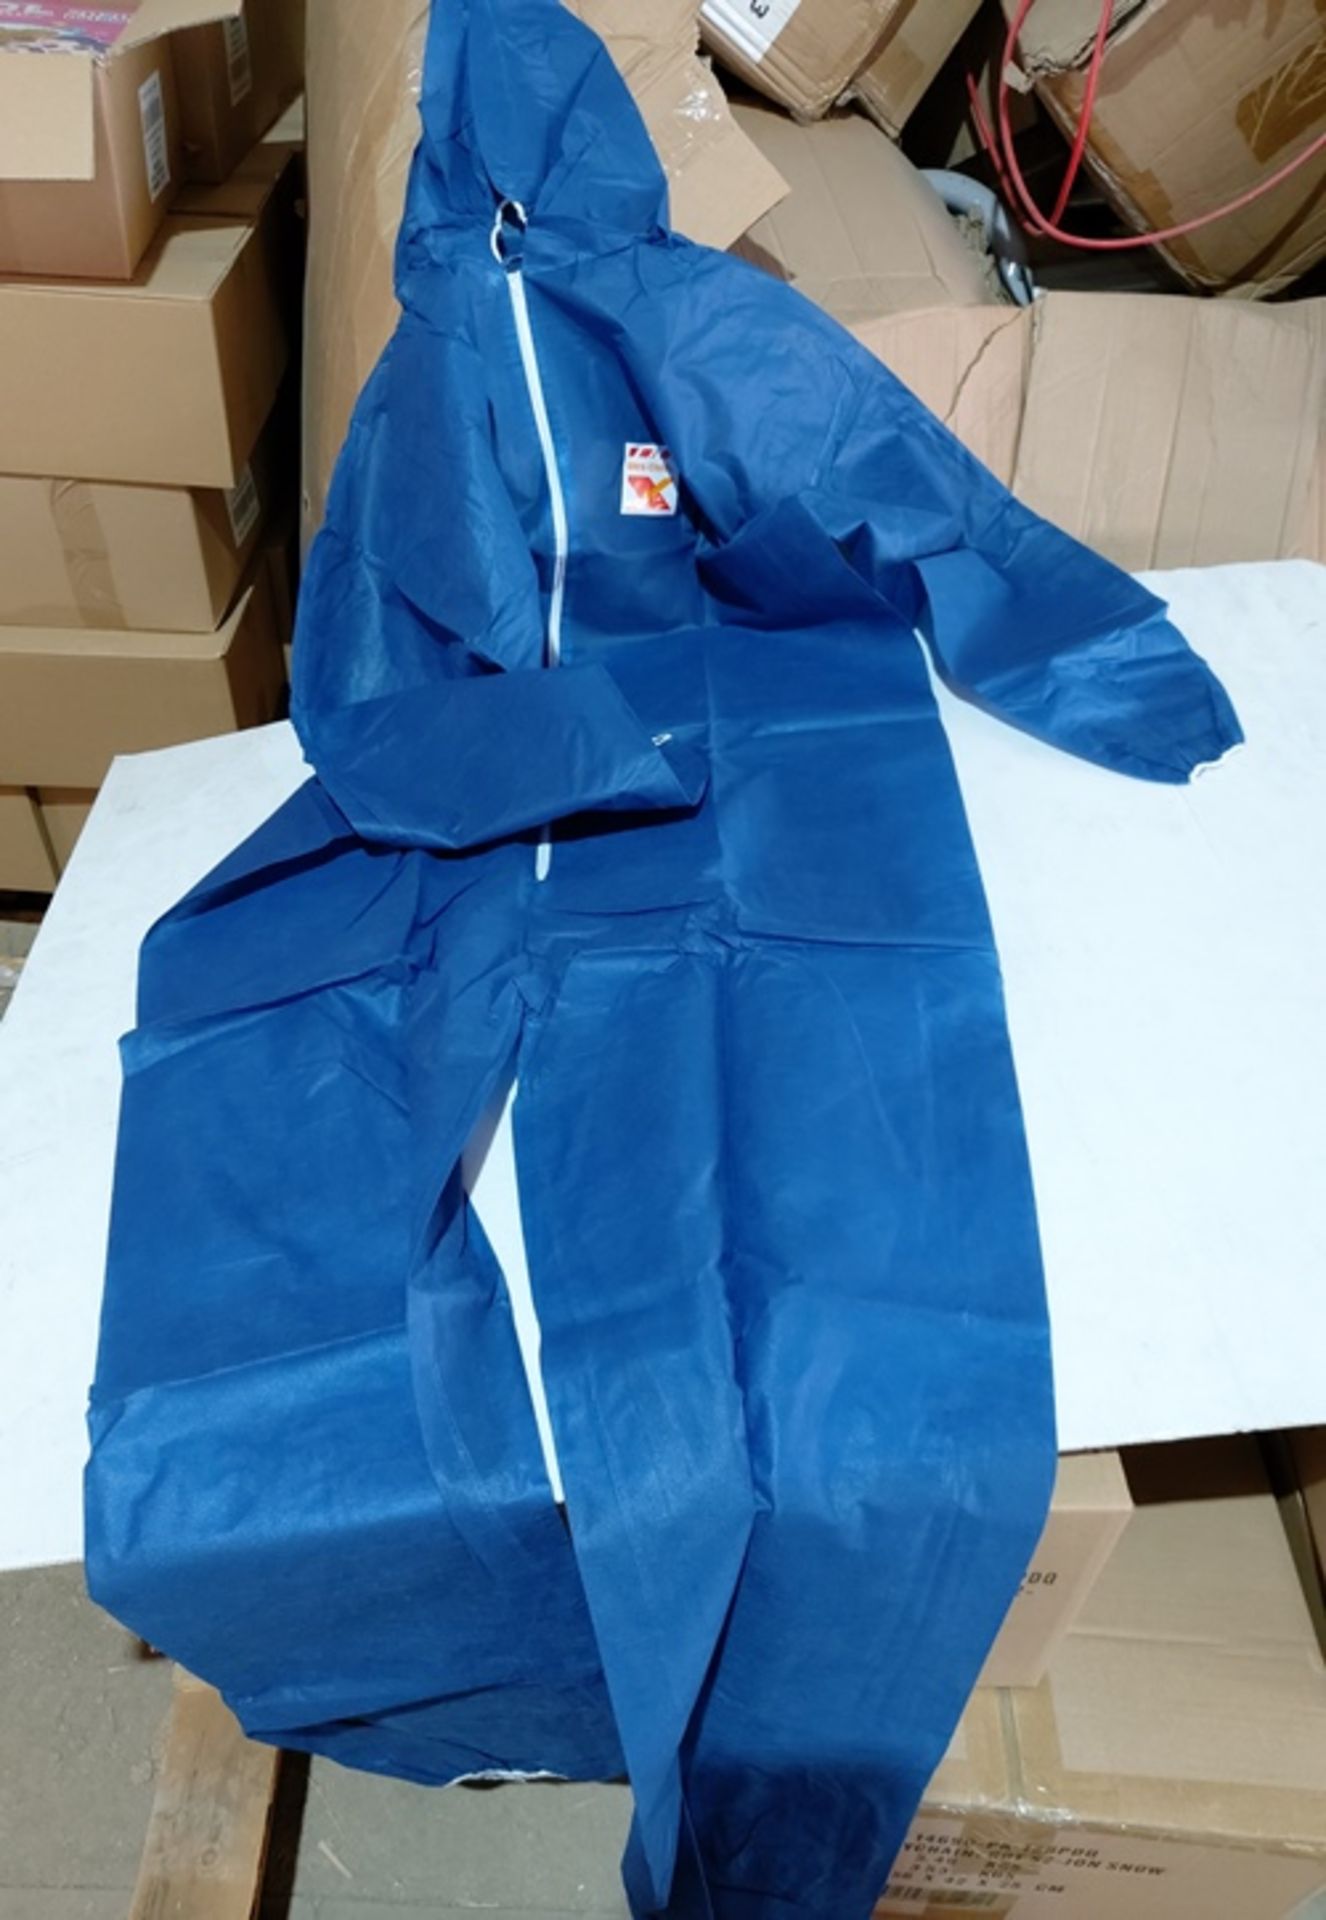 50 x Ultra Chem Blue polypropelene full body coveralls size Large New in original packaging